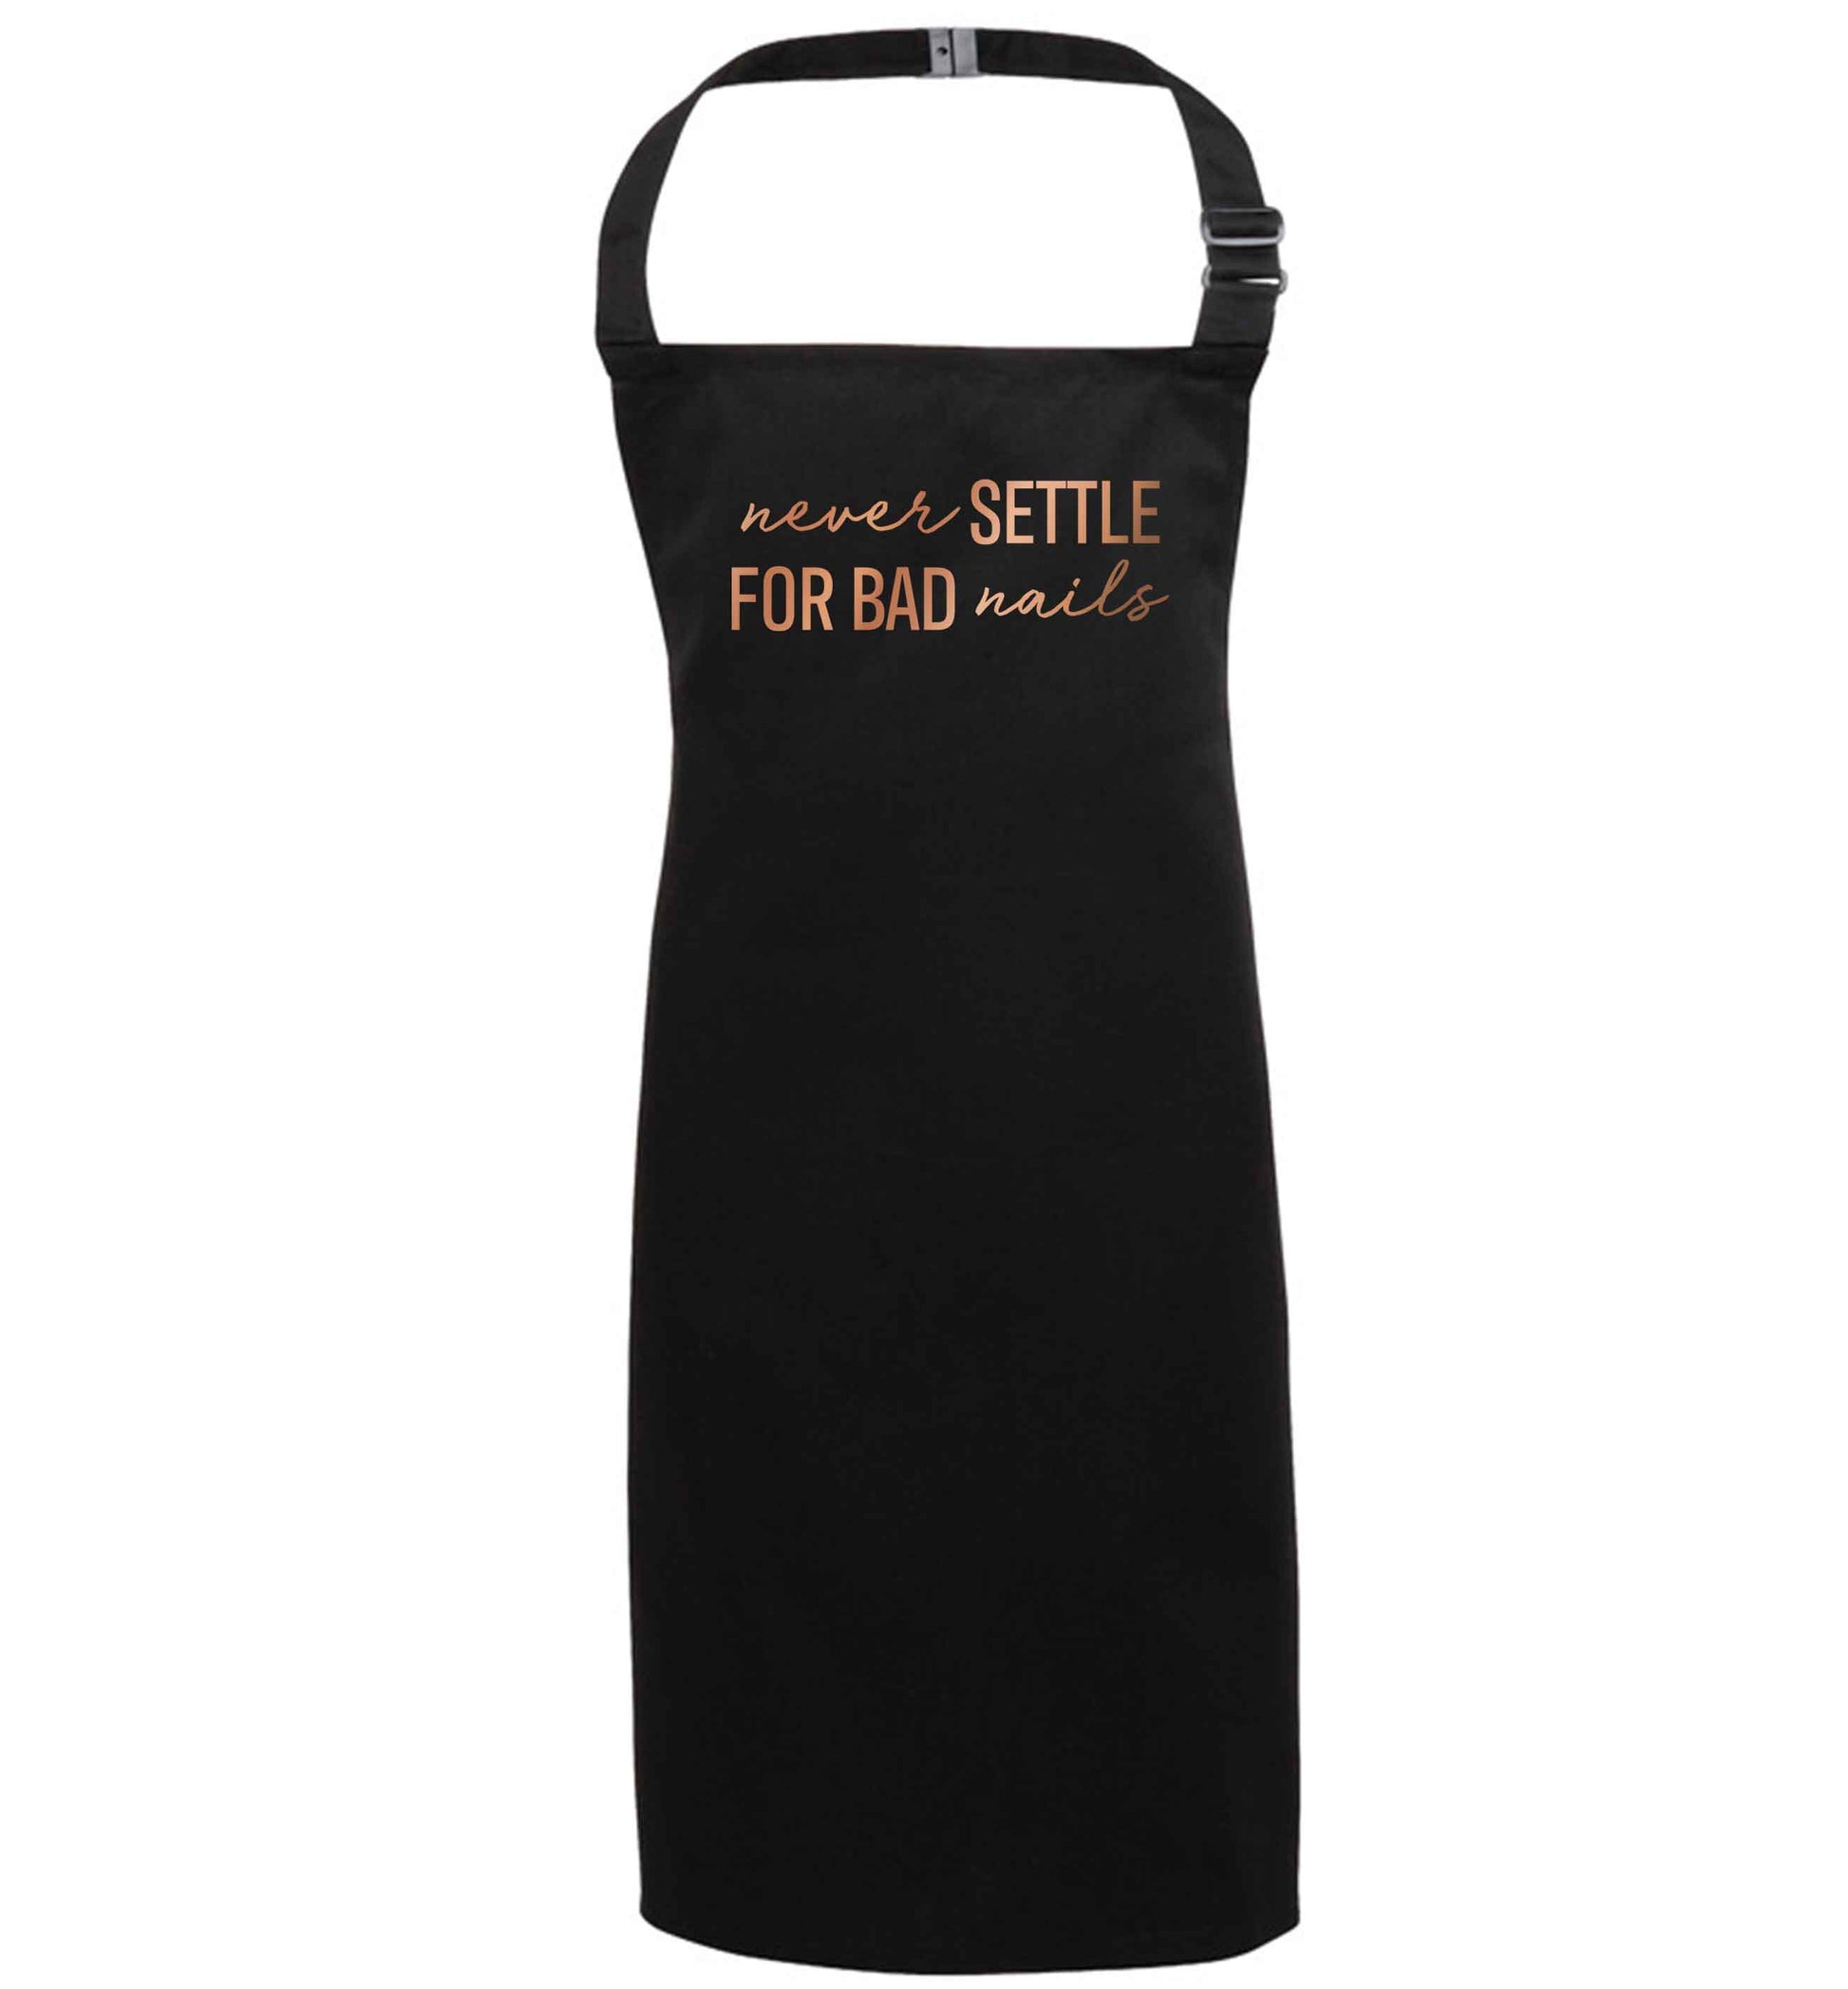 Never settle for bad nails - rose gold black apron 7-10 years